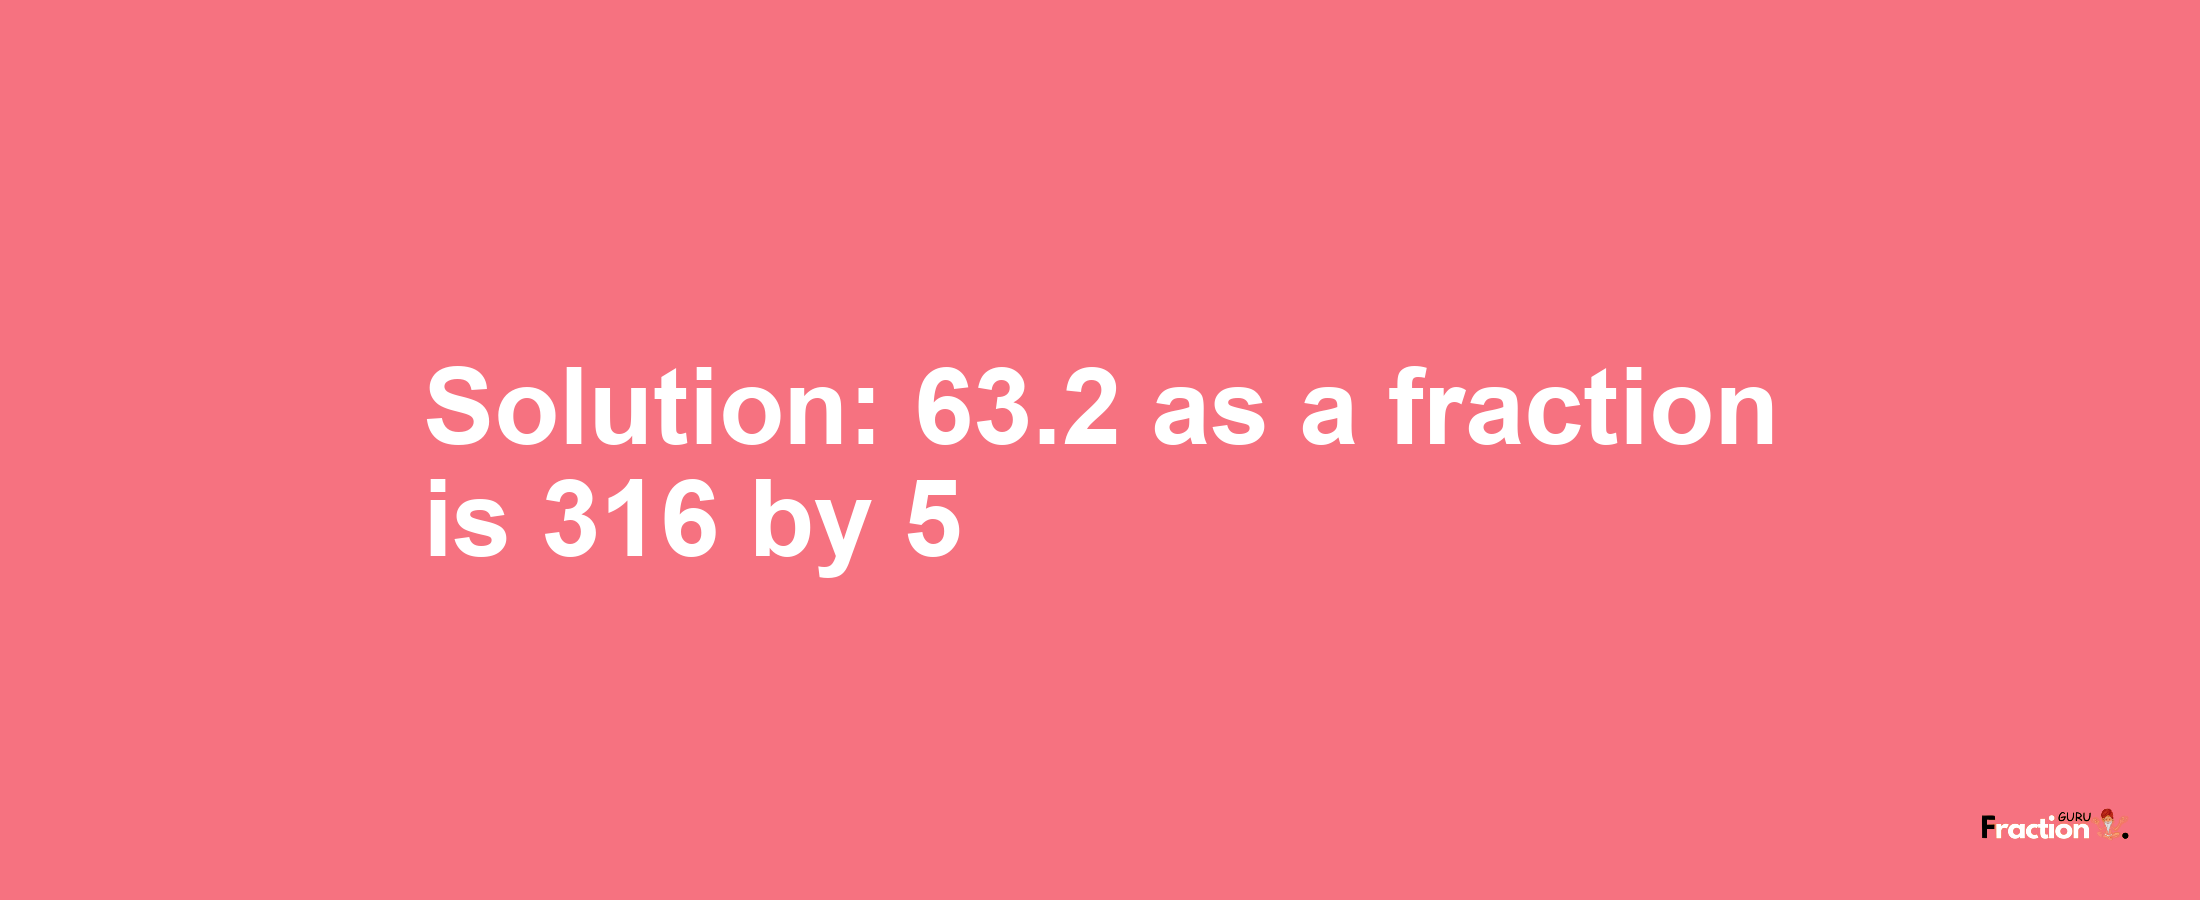 Solution:63.2 as a fraction is 316/5